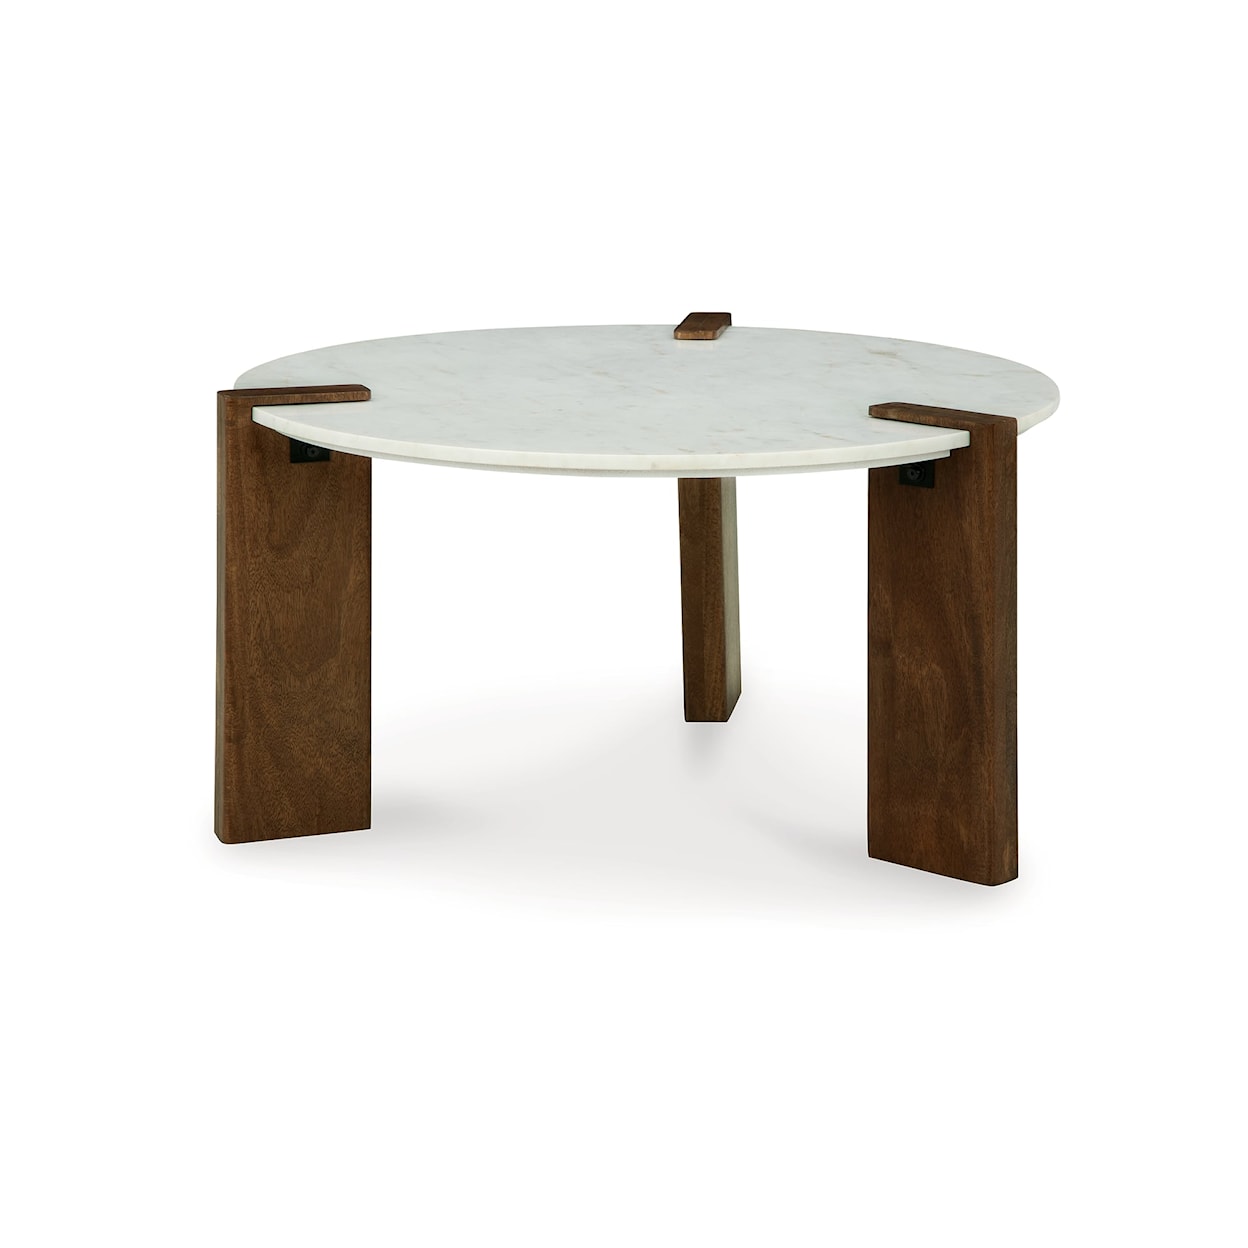 Benchcraft Isanti Round Coffee Table